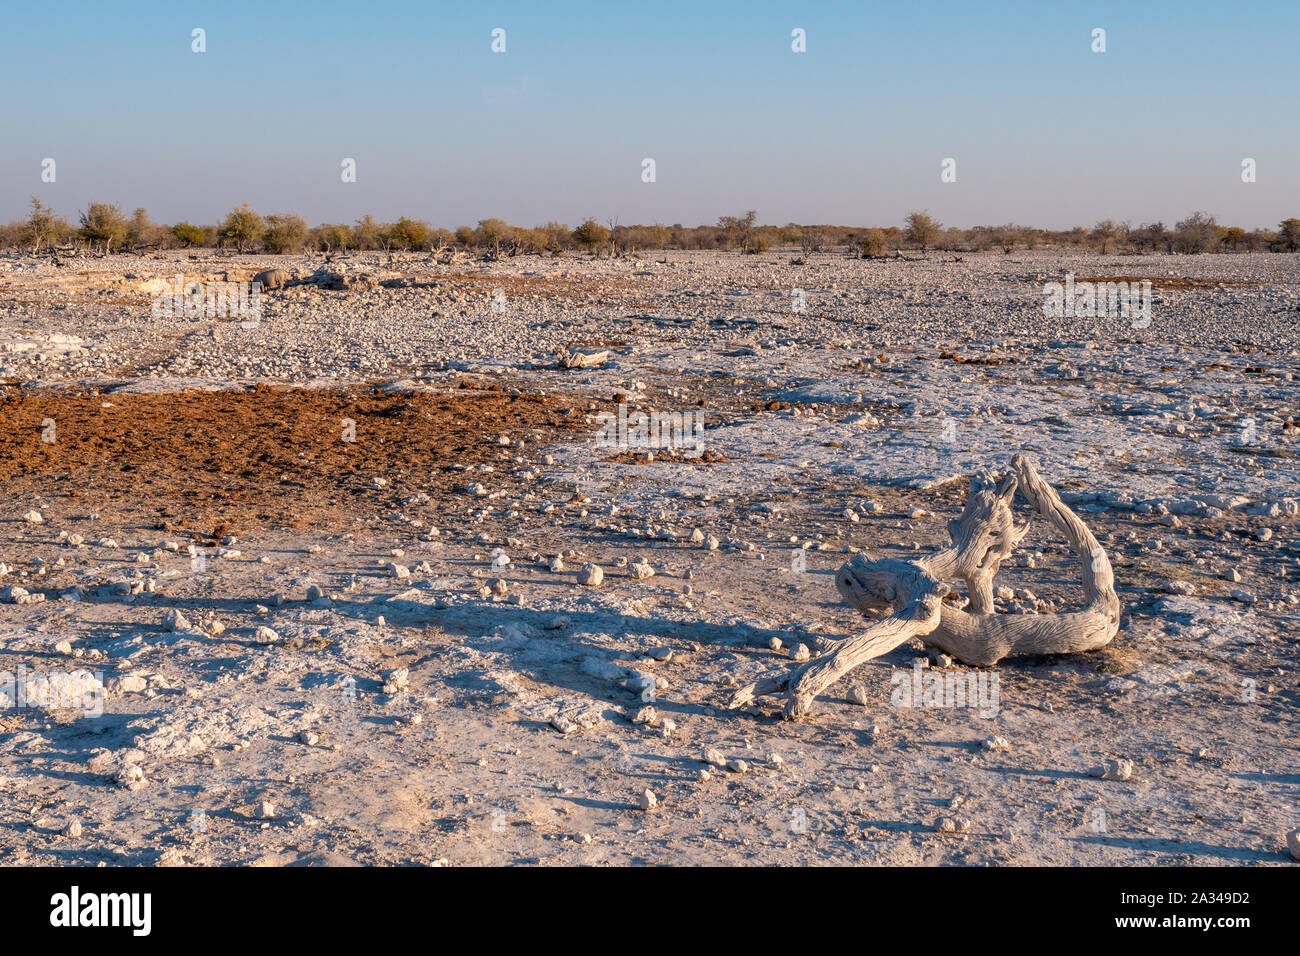 Rocky African Landscape with Bleached, White, Dried Wood in Etosha National Park, Namibia, Africa Stock Photo